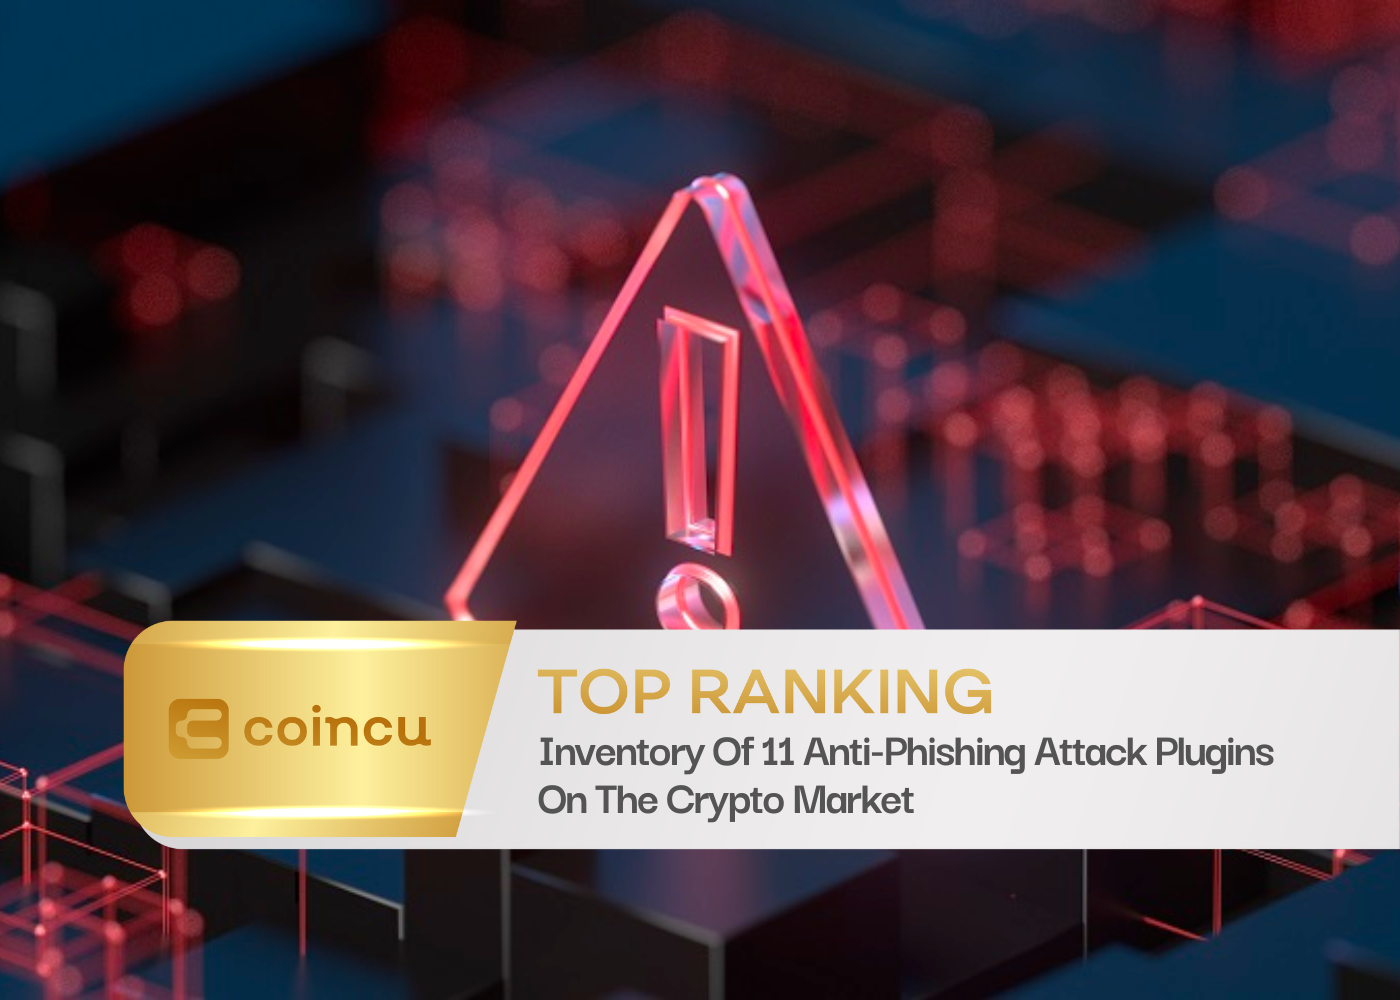 Inventory Of 11 Anti-Phishing Attack Plugins On The Crypto Market